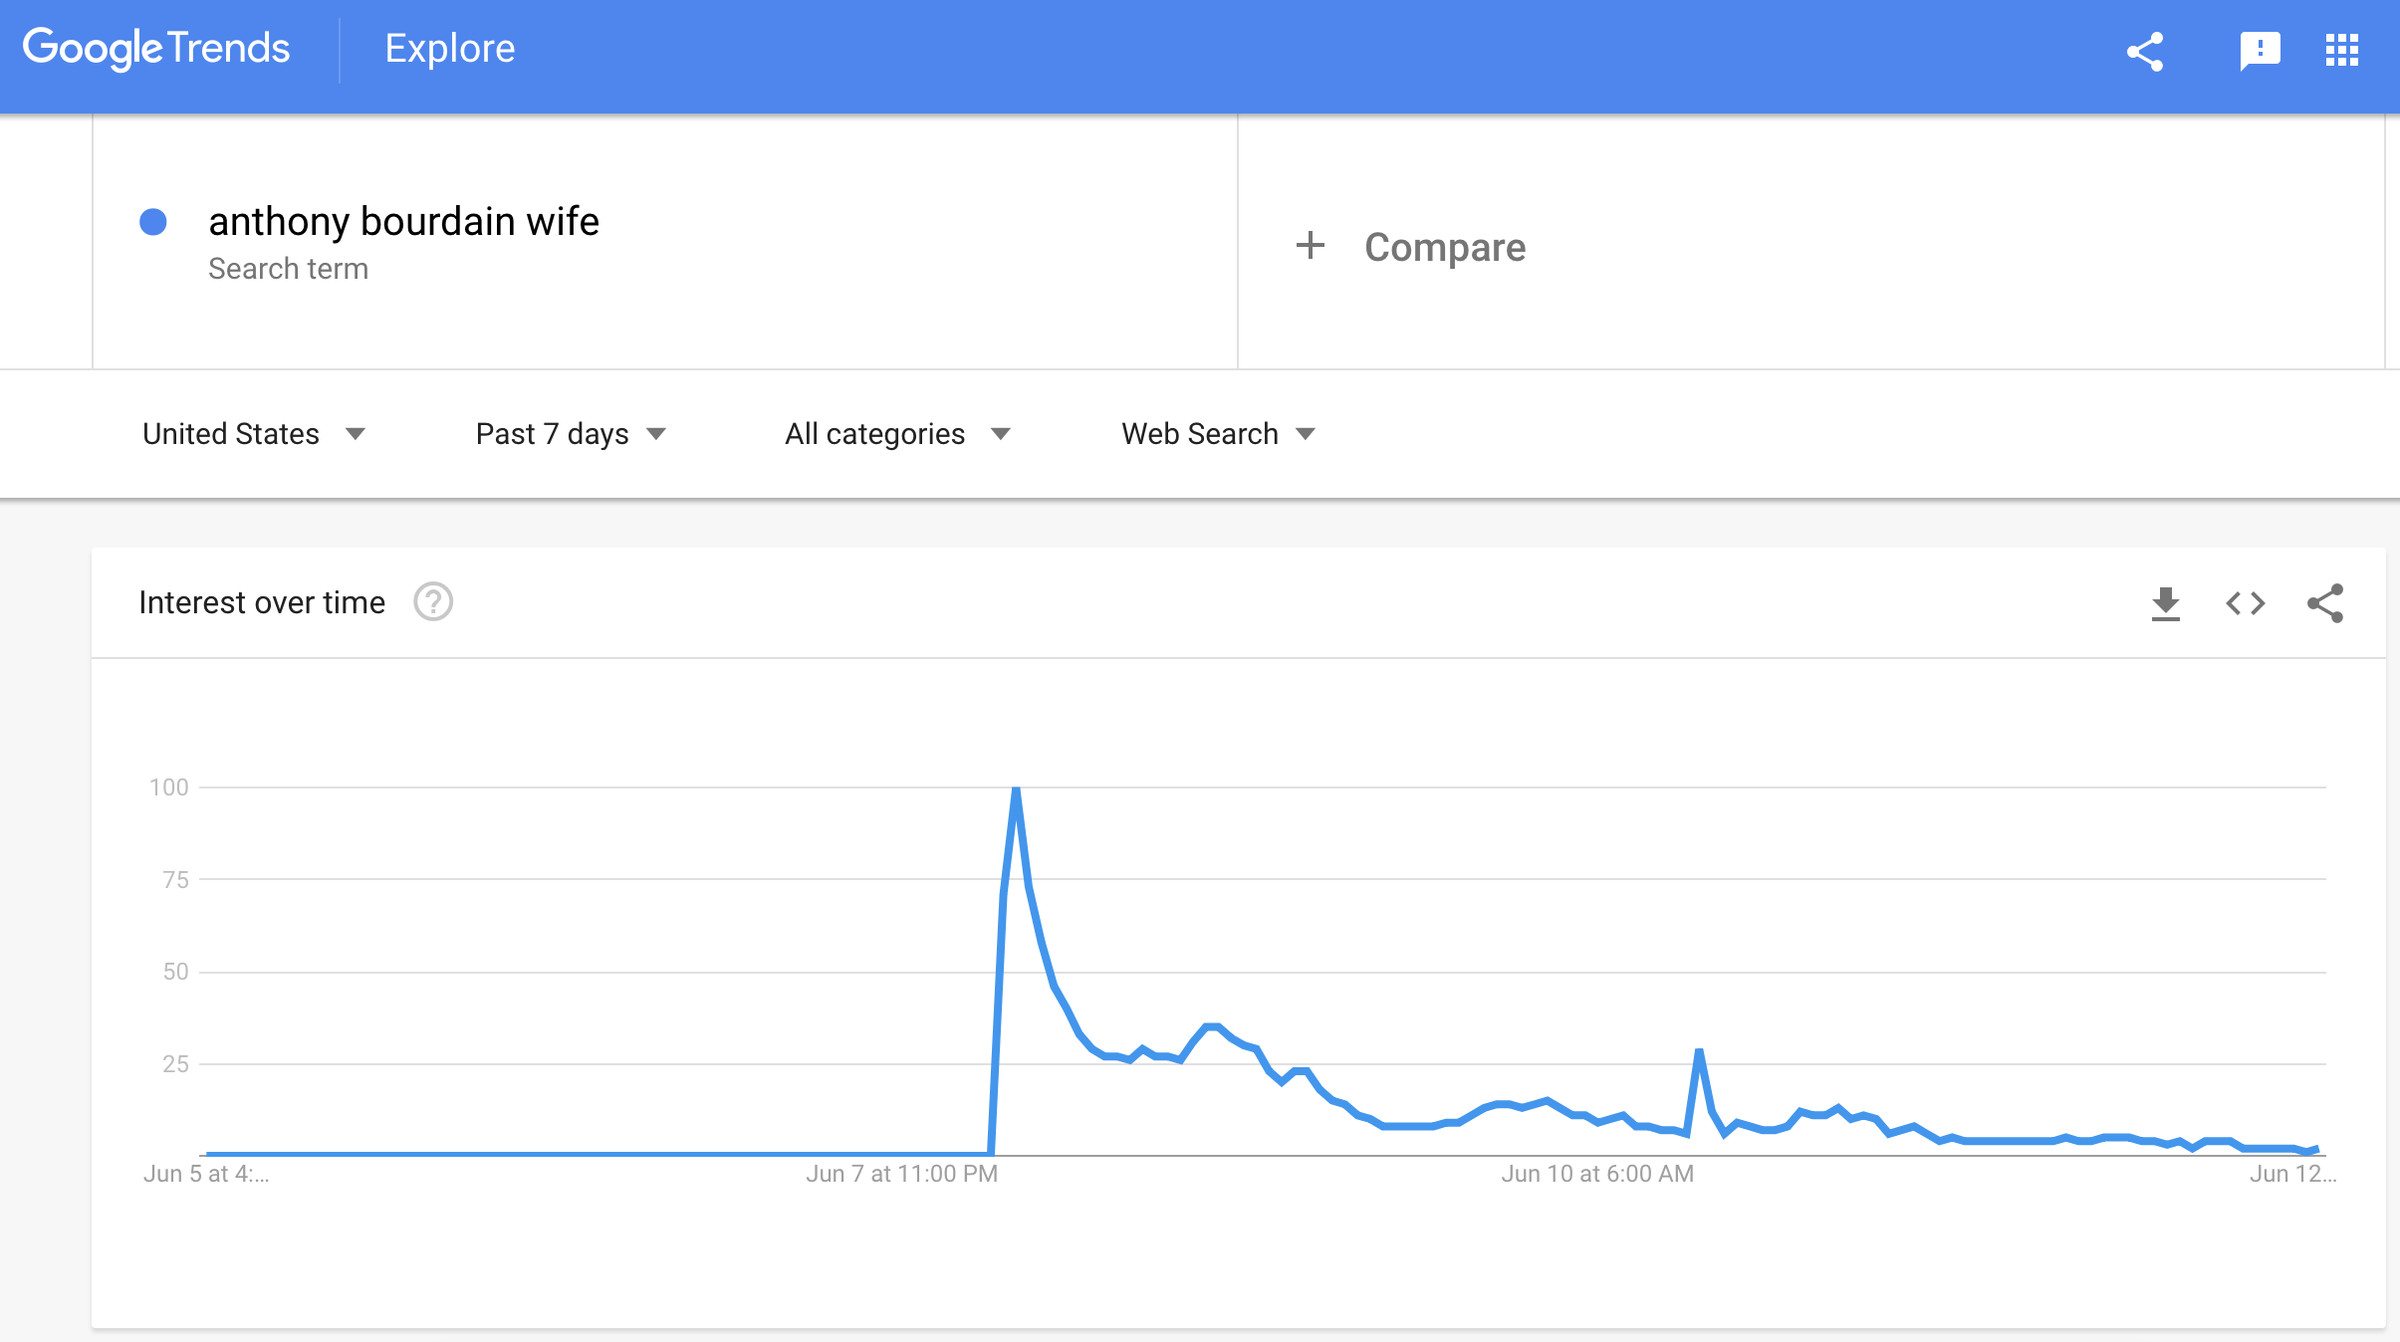 Google Trends data showing a spike in searches for “anthony bourdain wife” after his death